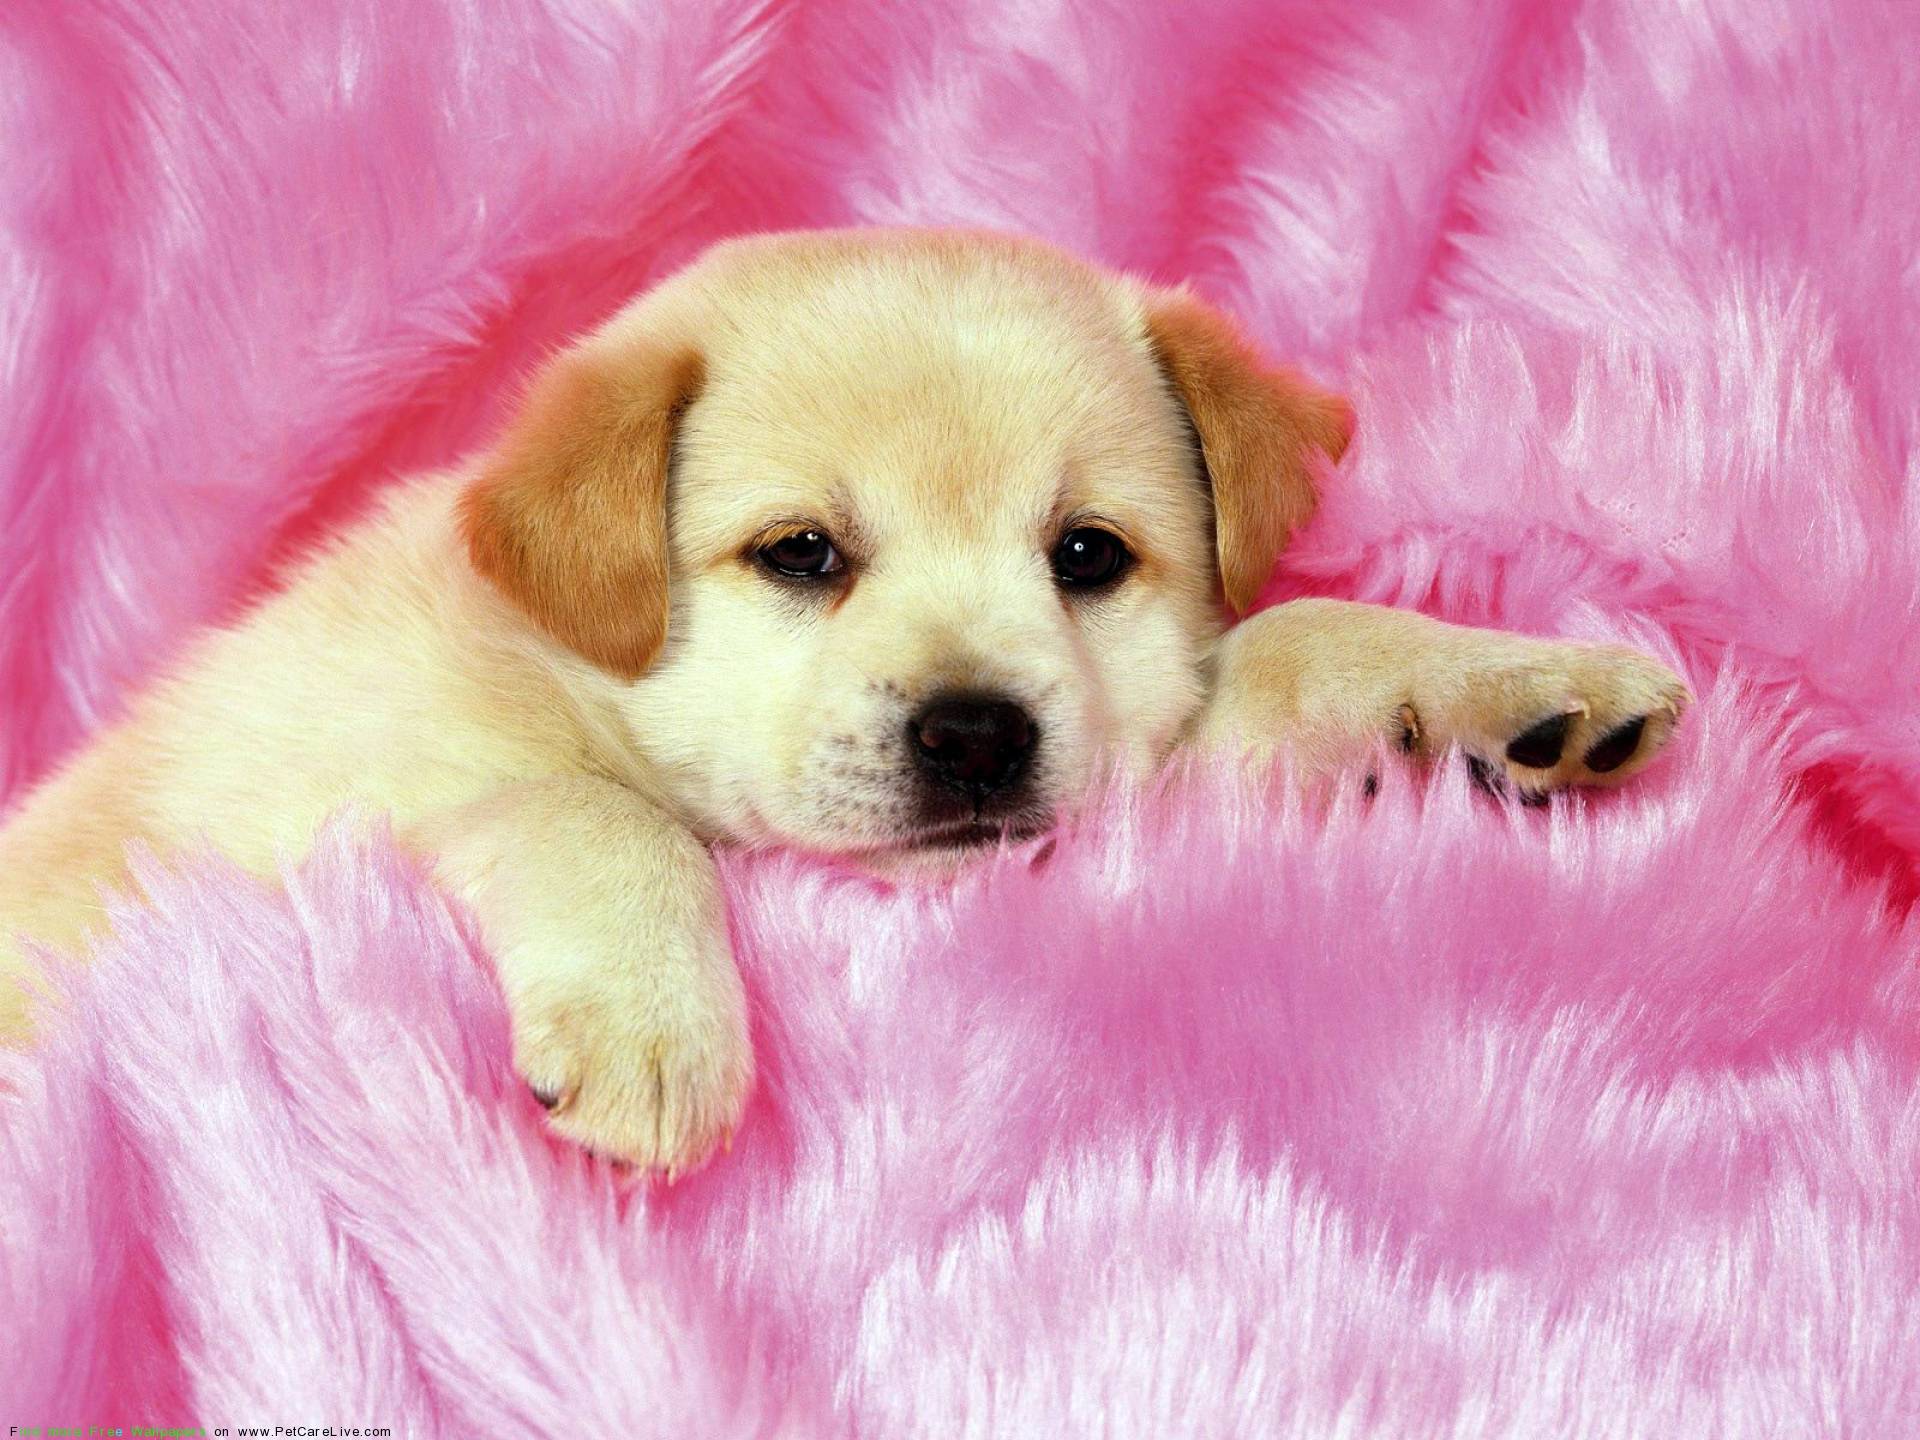 Cute Dogs And Puppies Wallpapers 1920x1440